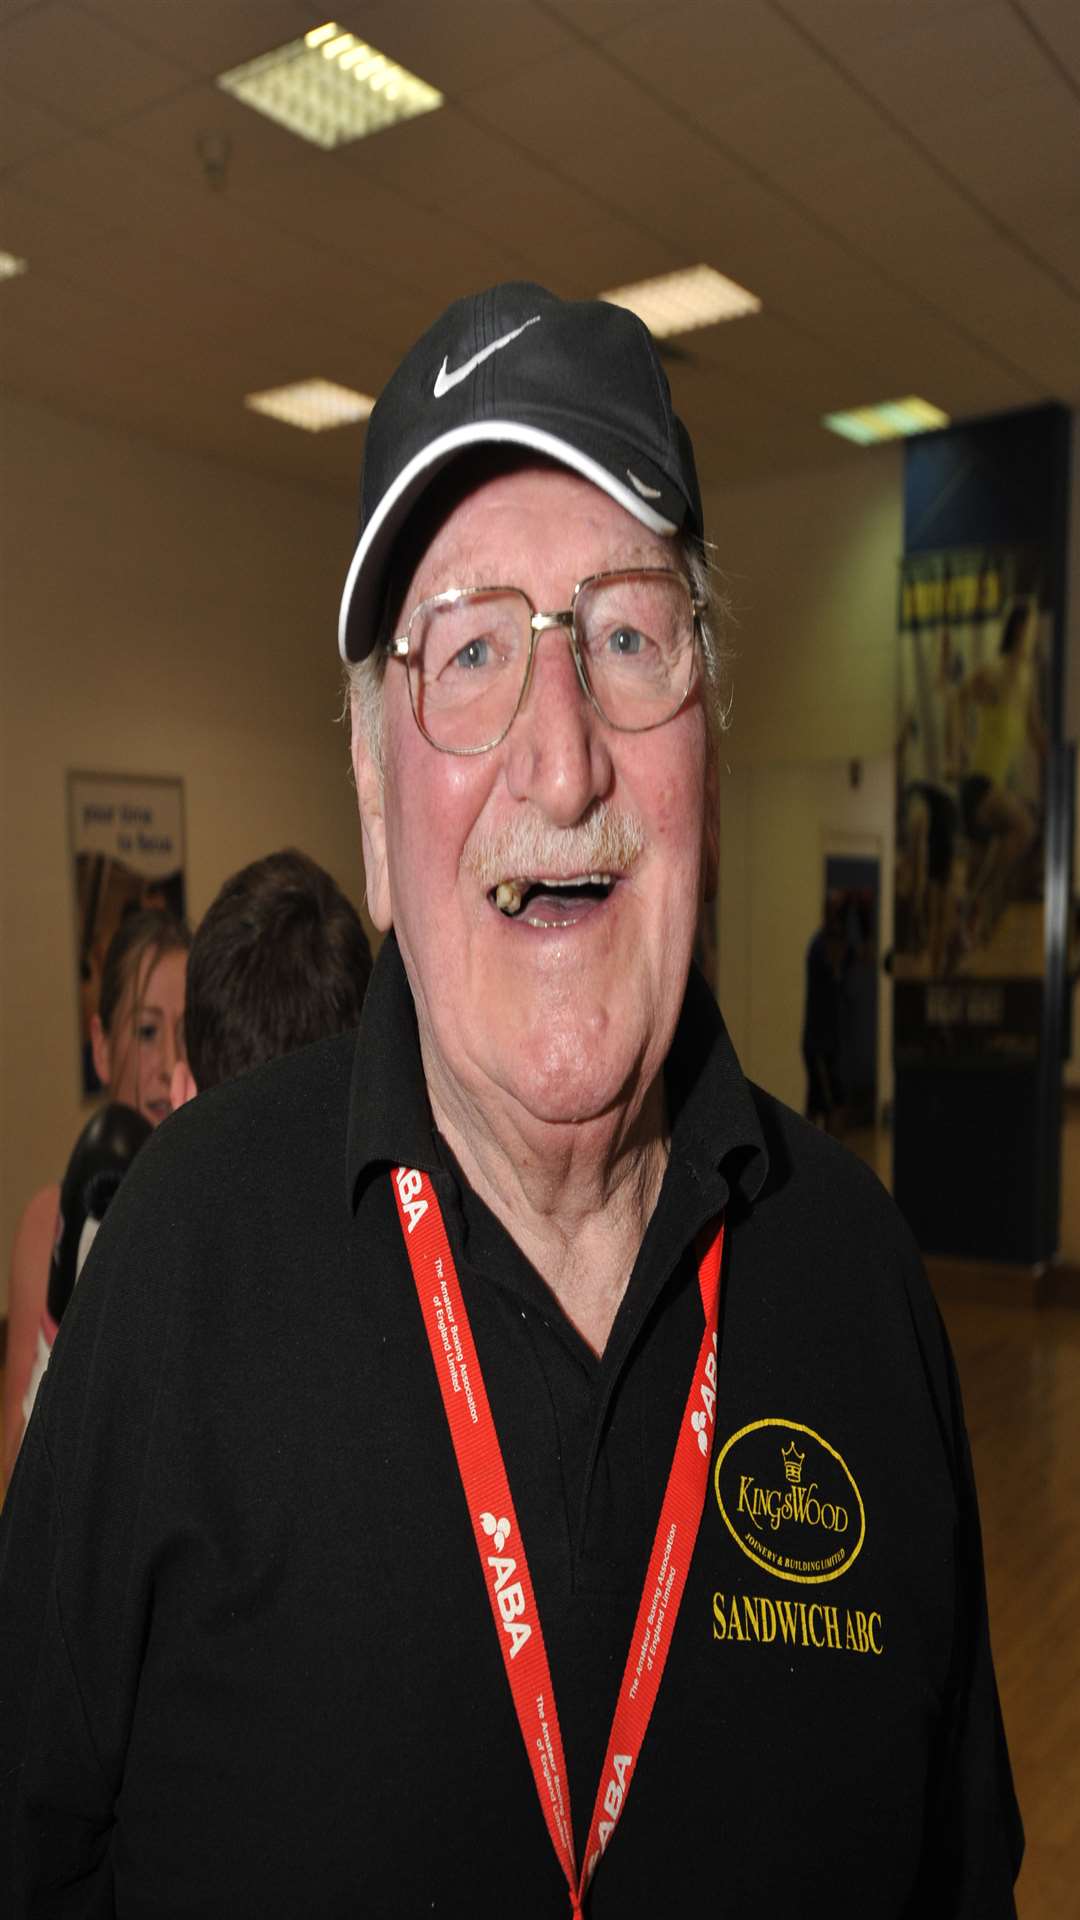 Frank Cornwall, who set up the boxing club in Sandwich